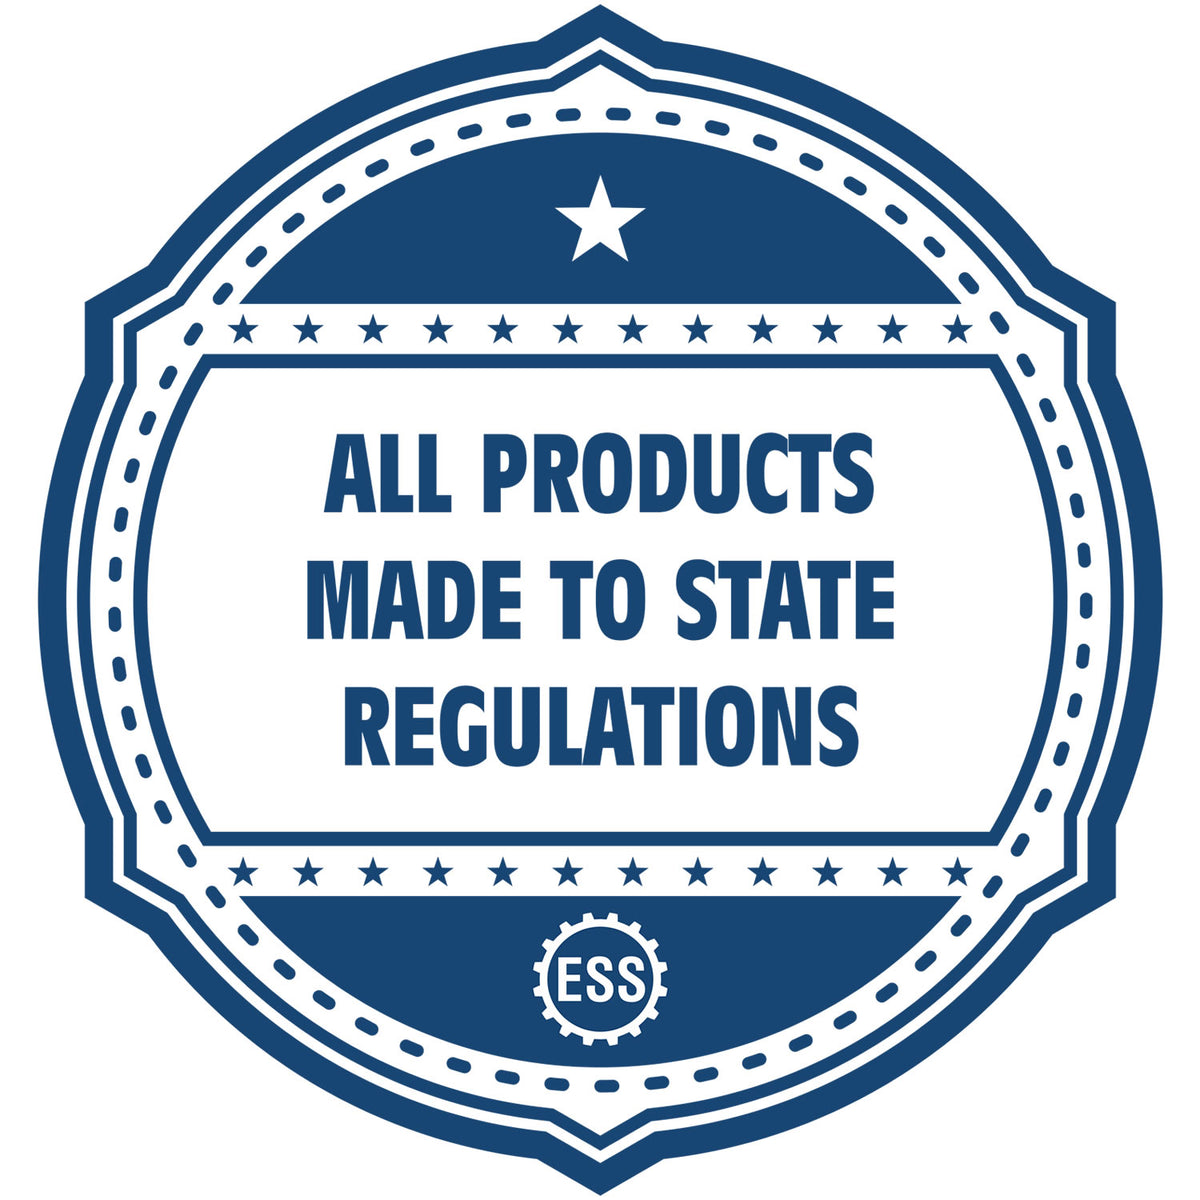 An icon or badge element for the Self-Inking Colorado PE Stamp showing that this product is made in compliance with state regulations.